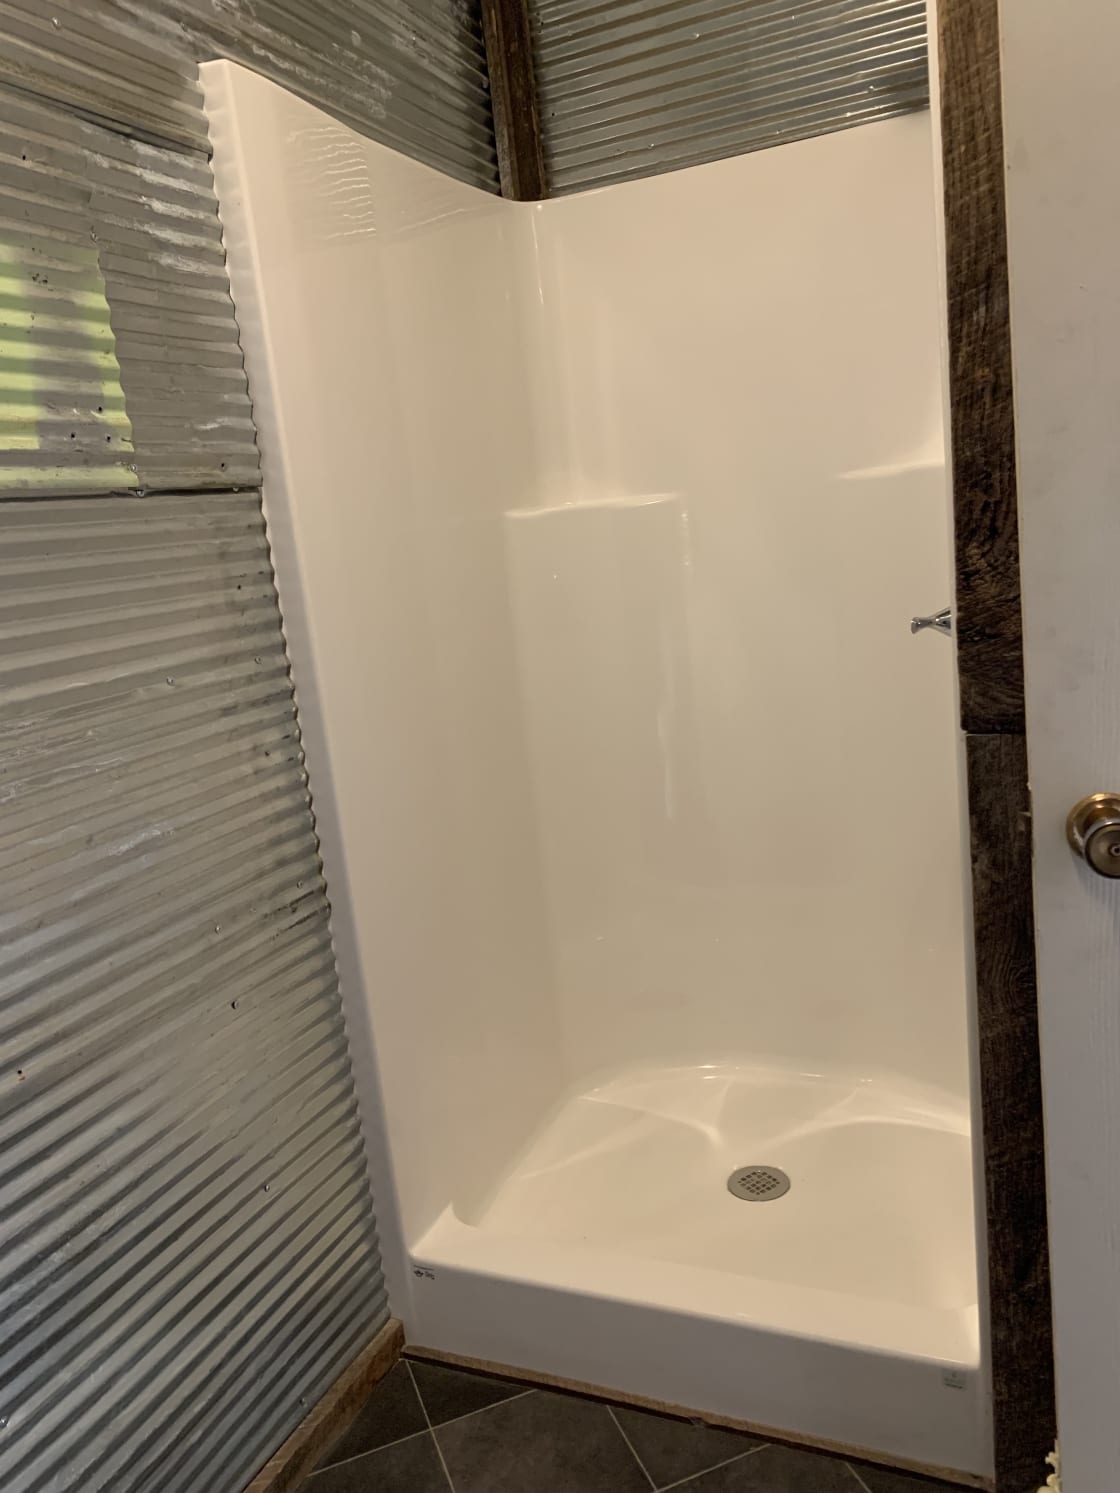 Cabin 45 has a bathroom with shower inside the cabin.